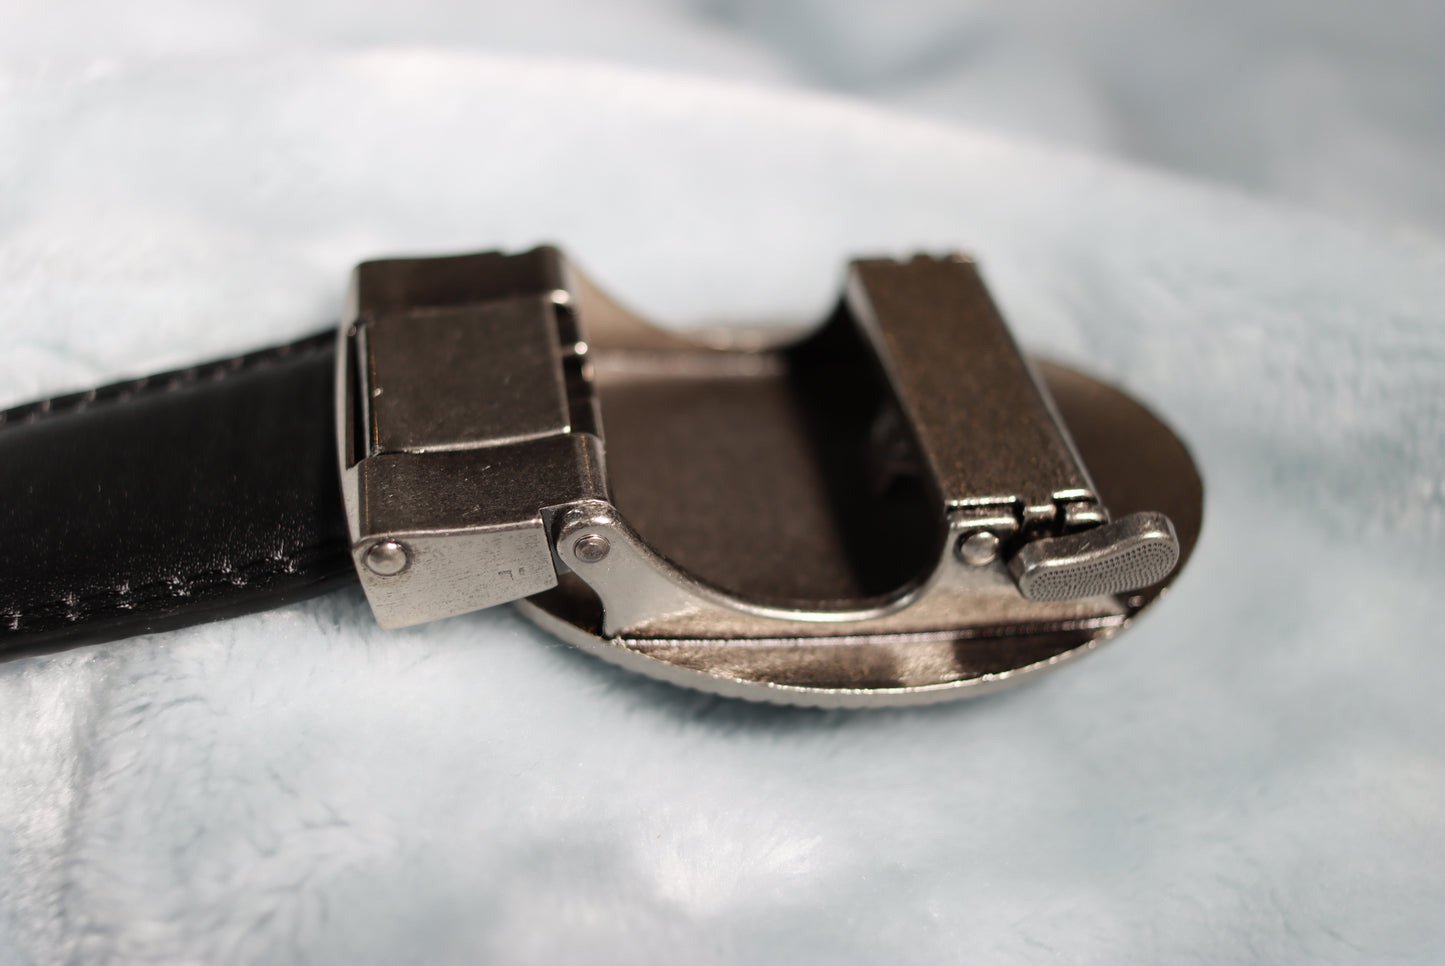 The State of Texas Black Leather Western Cowboy Belt